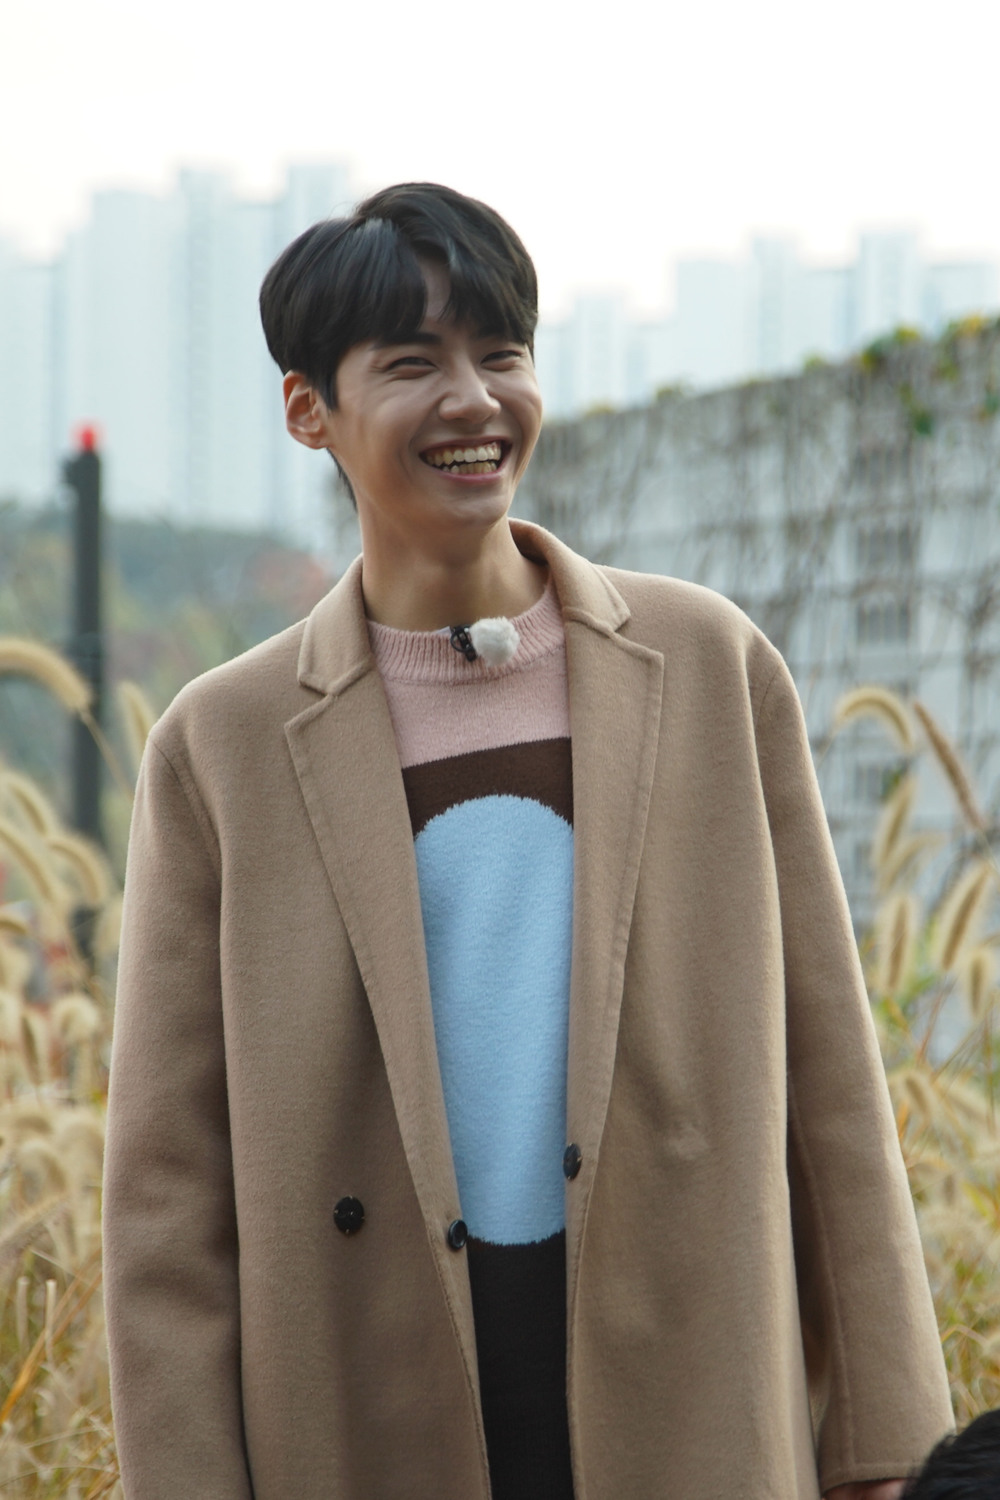 Kang Ho-dong recalled Lee Seung-gi when he saw Lee Jin-hyuk, the entertainment age.JTBC Lets Eat Dinner Together, which will be broadcast on November 27, will be challenged by So-won Ham and singer Lee Jin-hyuk in the Dongtan 2 New Town in Hwaseong City.Lee Jin-hyuk, who appeared as a rice companion in the recent Lets Eat Dinner Together recording.Kang Ho-dong said in the appearance of Lee Jin-hyuk, We control 80% of the portal site entertainment area.I am told that I am still if I stay still. Lee Jin-hyuk showed the aspect of an entertainer ambitious man without being pushed between the So-won Ham who poured out the talk with the national MC brother and the passion of the past.pear hyo-ju